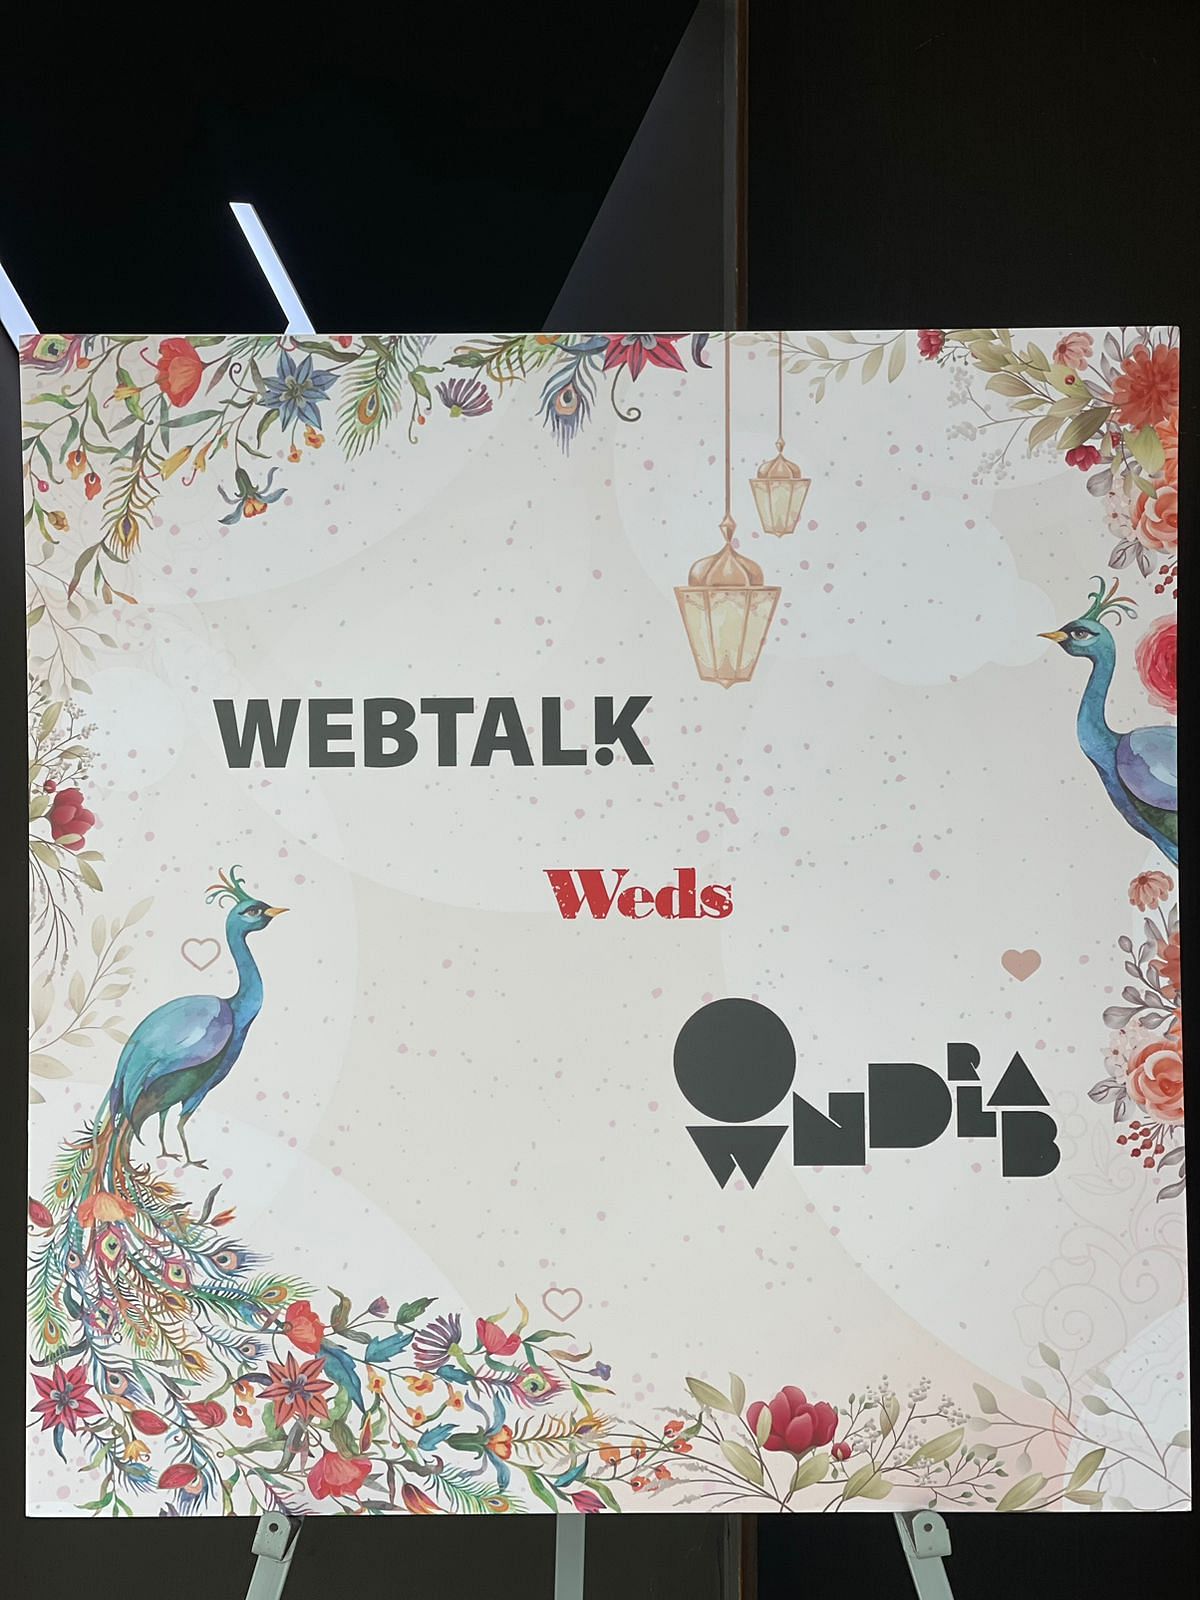 Wondrlab's first-ever global and fifth overall acquisition – WebTalk, a B2C digital marketing agency from Warsaw, Poland